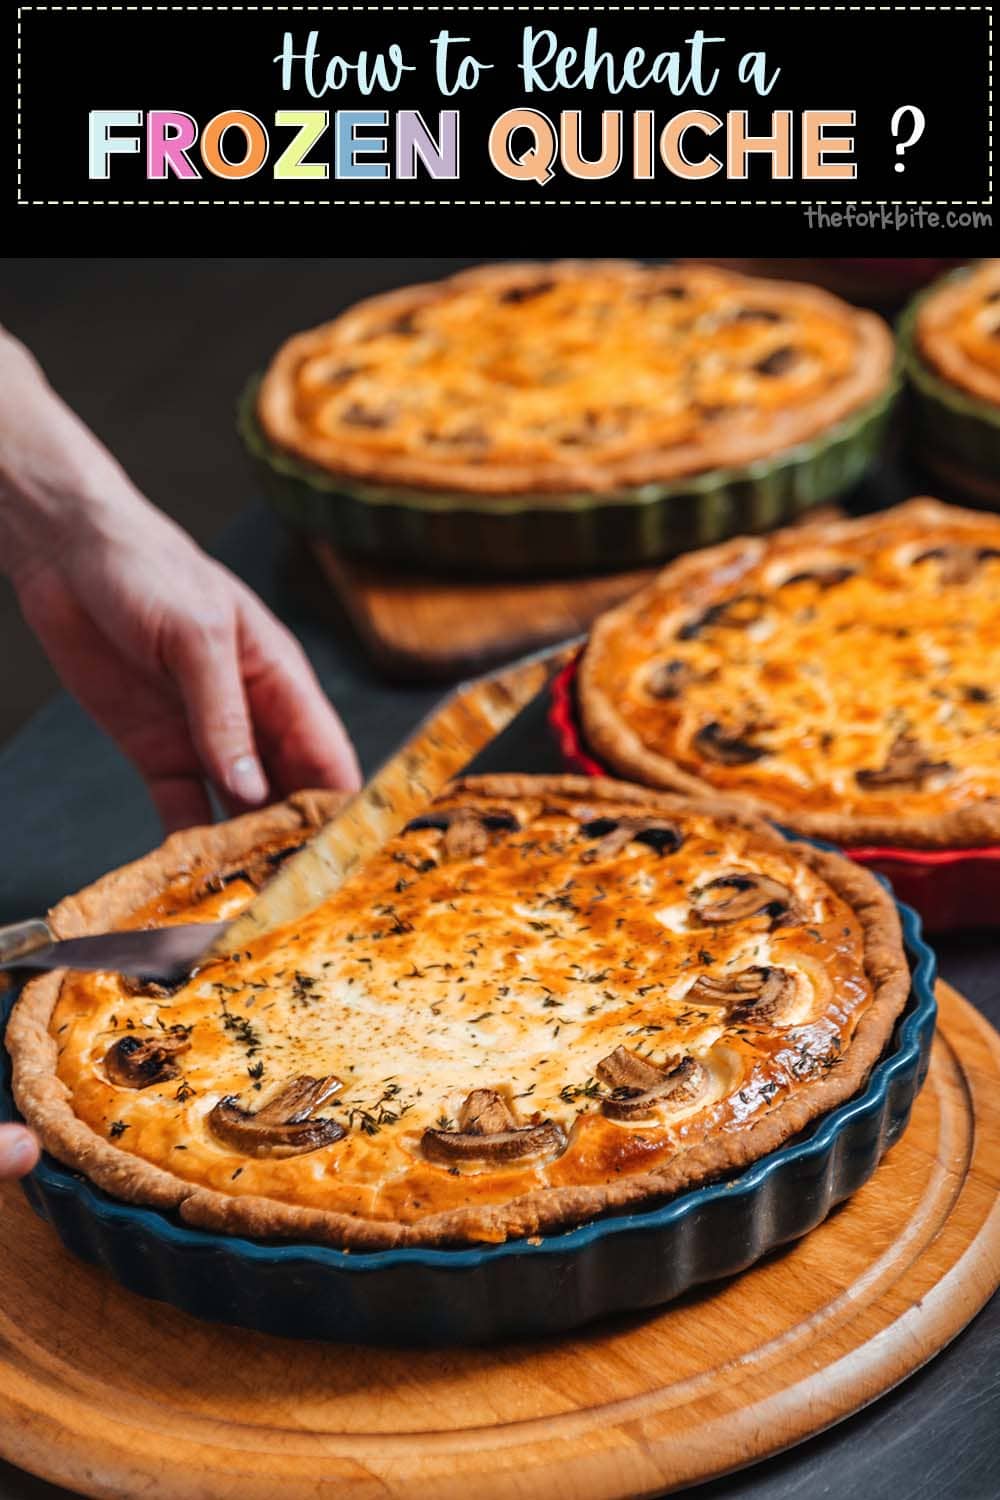 There are several ways you can try reheating frozen quiche. You can use your oven or your microwave.